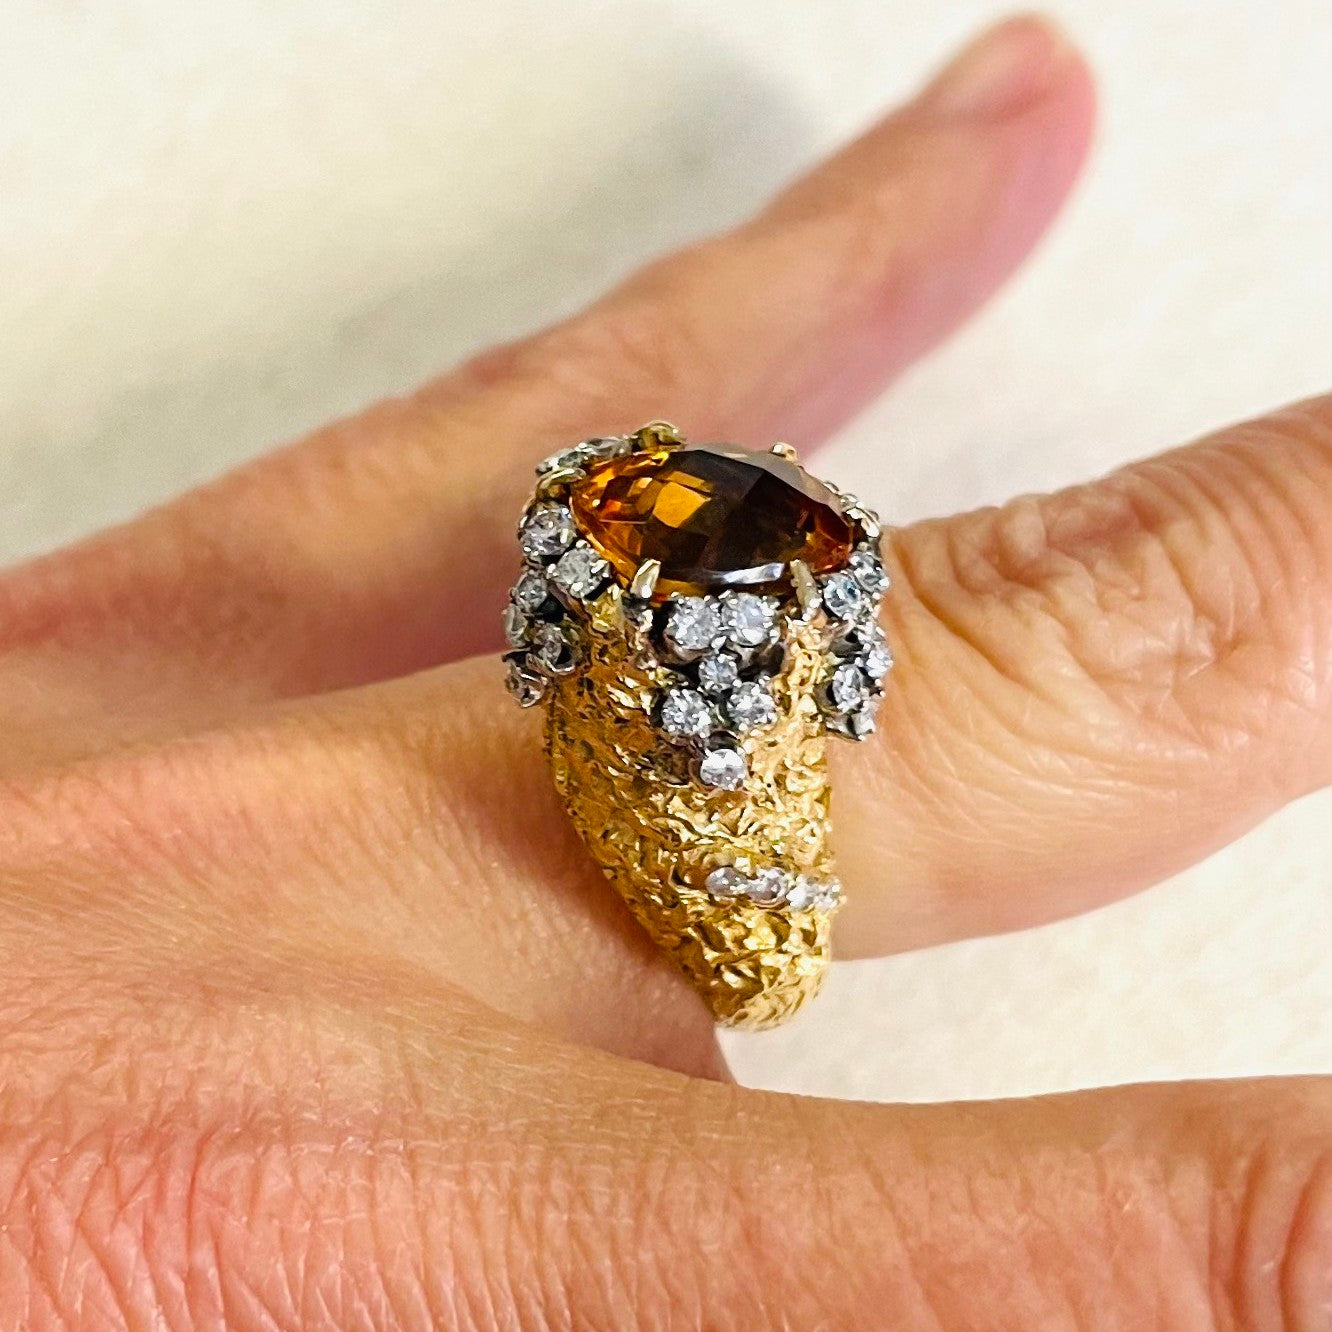 1960s 14KT Yellow Gold Citrine & Diamond Ring profile view on finger